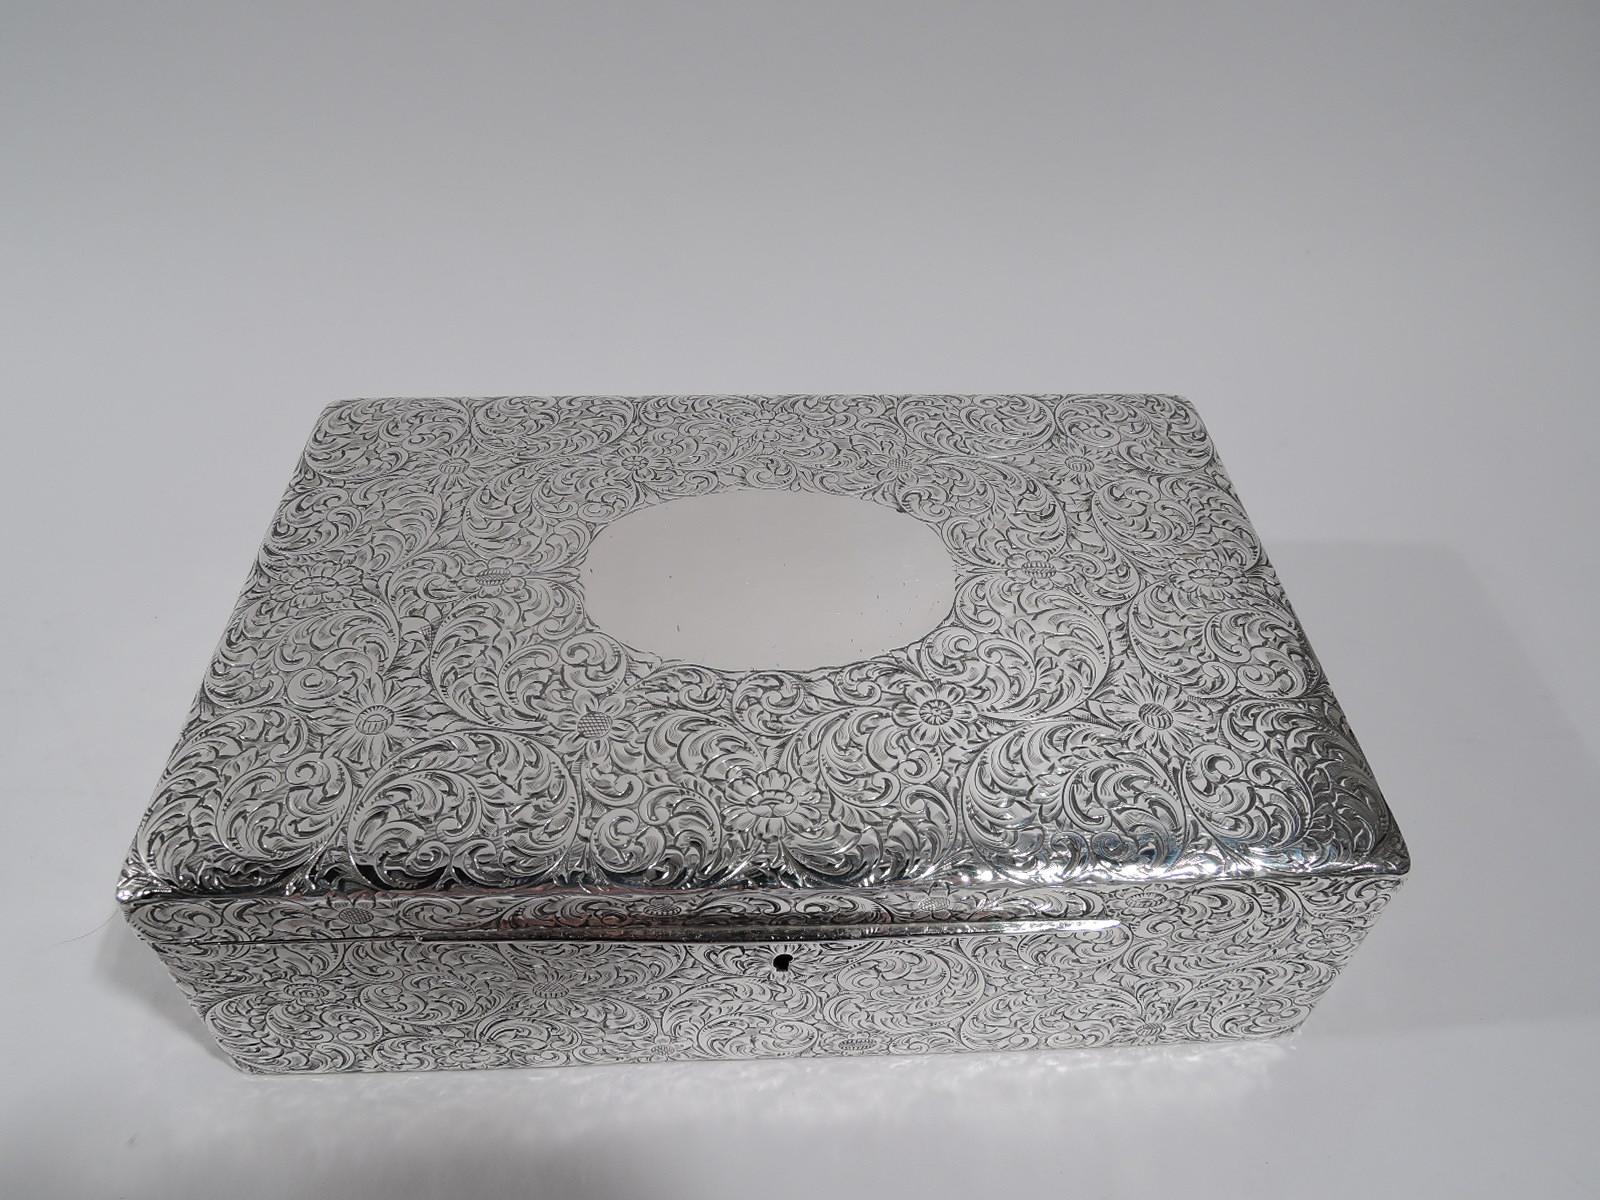 American Art Nouveau sterling silver jewelry box, circa 1910. Rectangular with straight sides. Cover hinged and gently curved with long tab. Dense scrolling flowers engraved allover. Cover top has large oval frame (vacant). Box and cover velvet